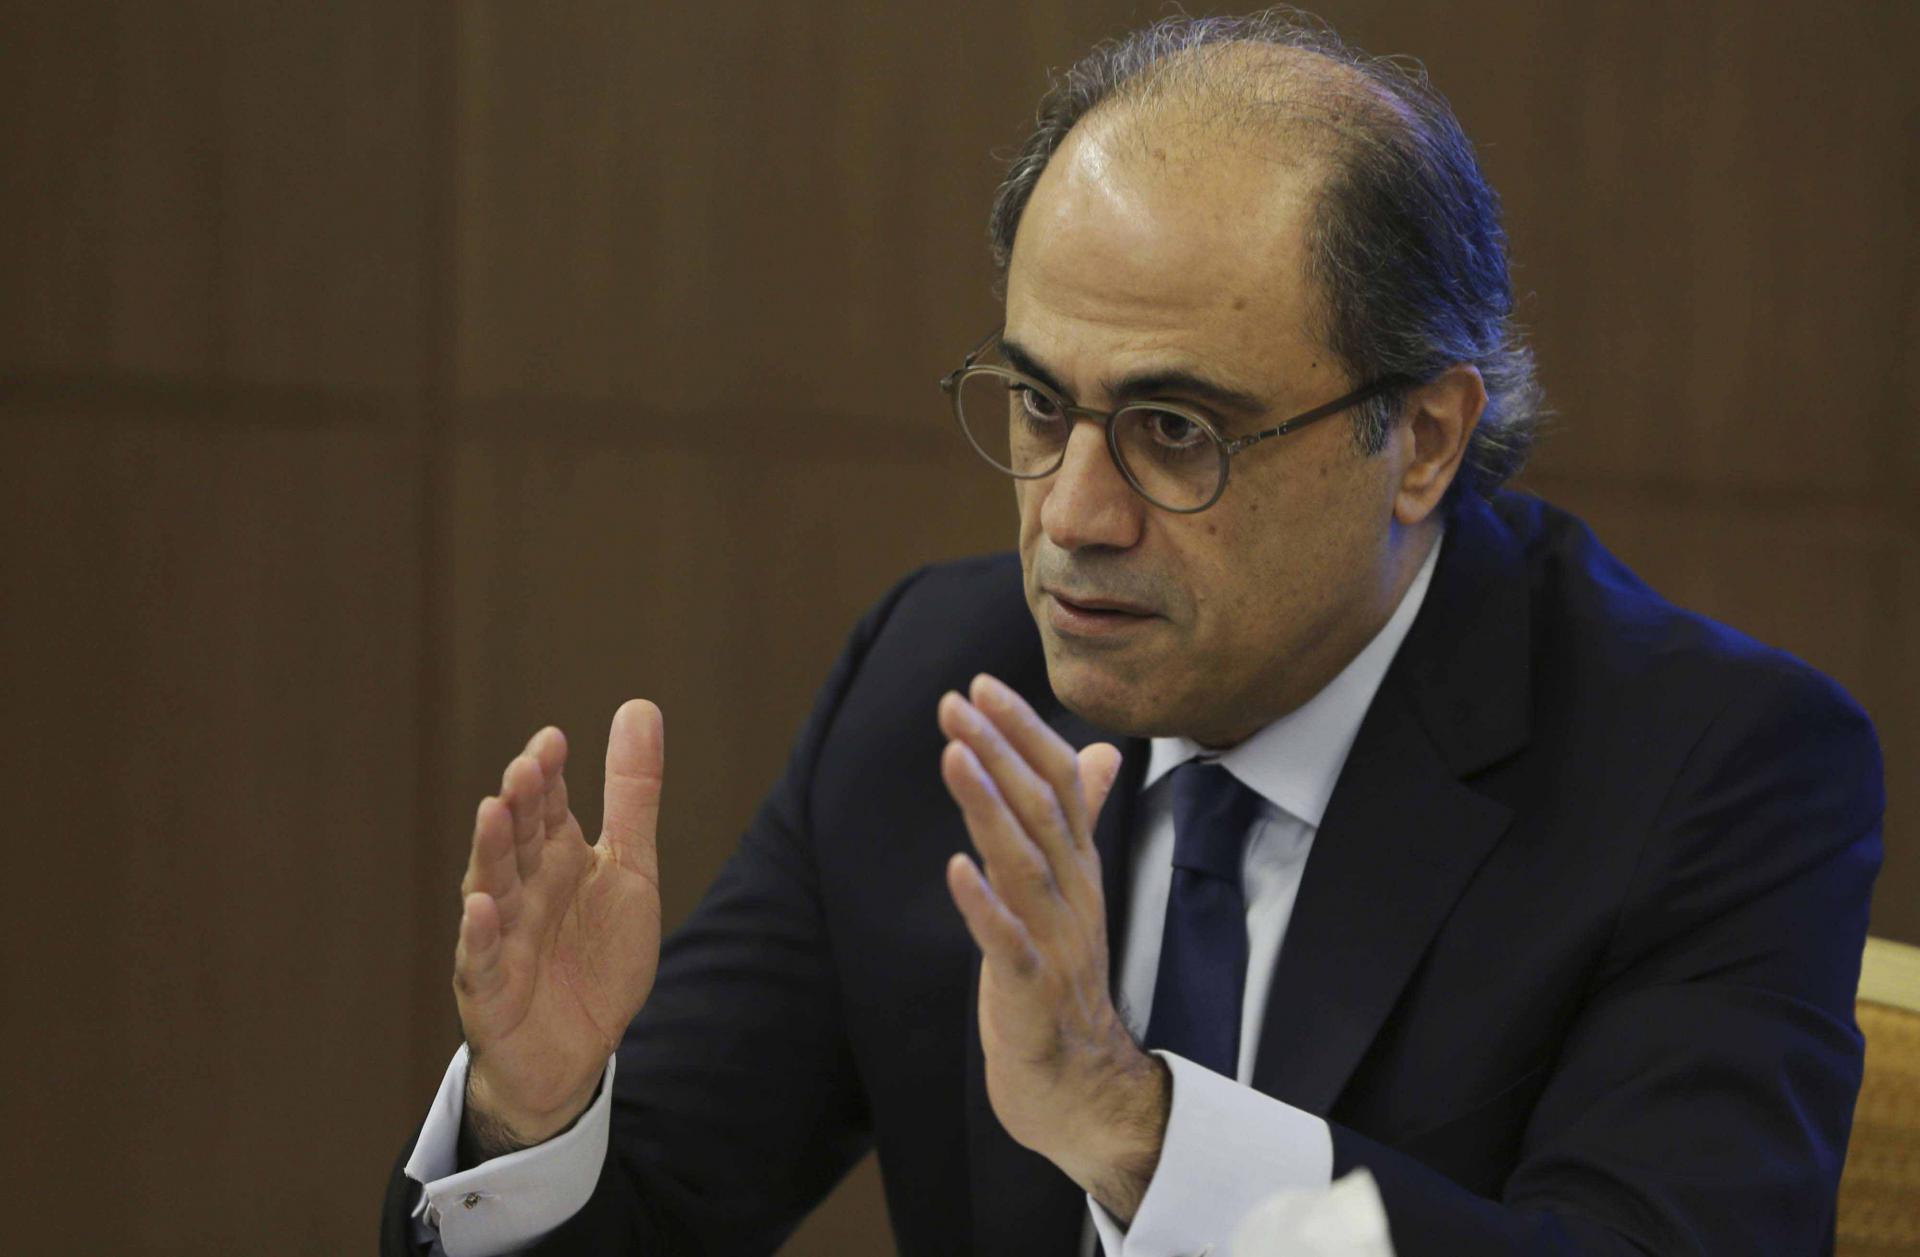 Jihad Azour, the IMF's Mideast and Central Asia director, talks during his press conference in Dubai, United Arab Emirates